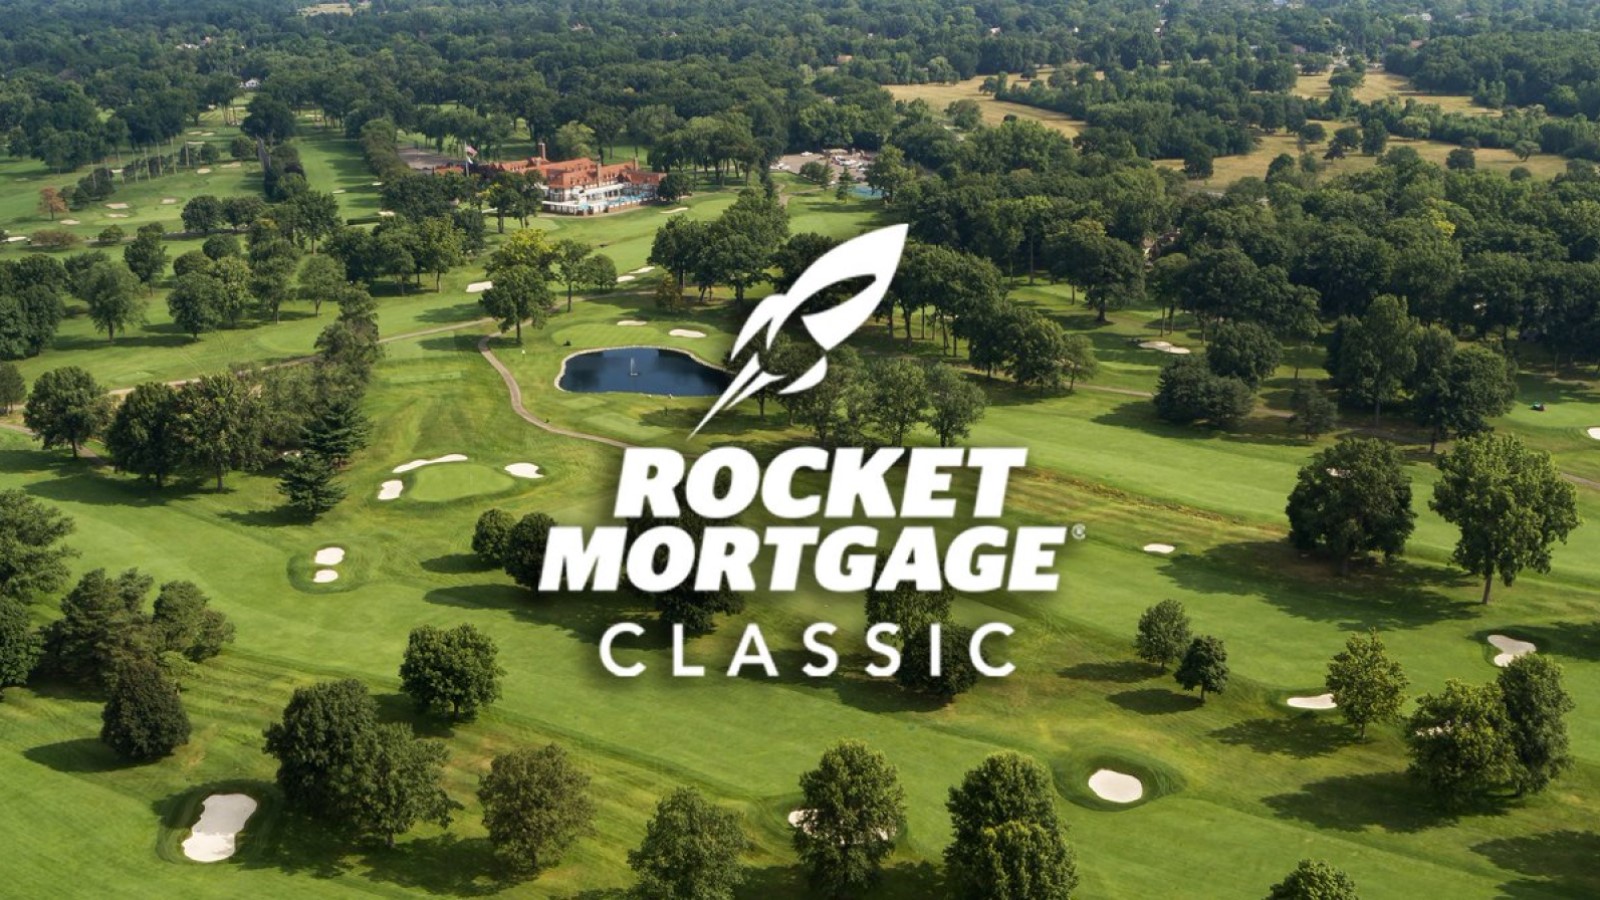 How to Buy Rocket Mortgage Classic Tickets